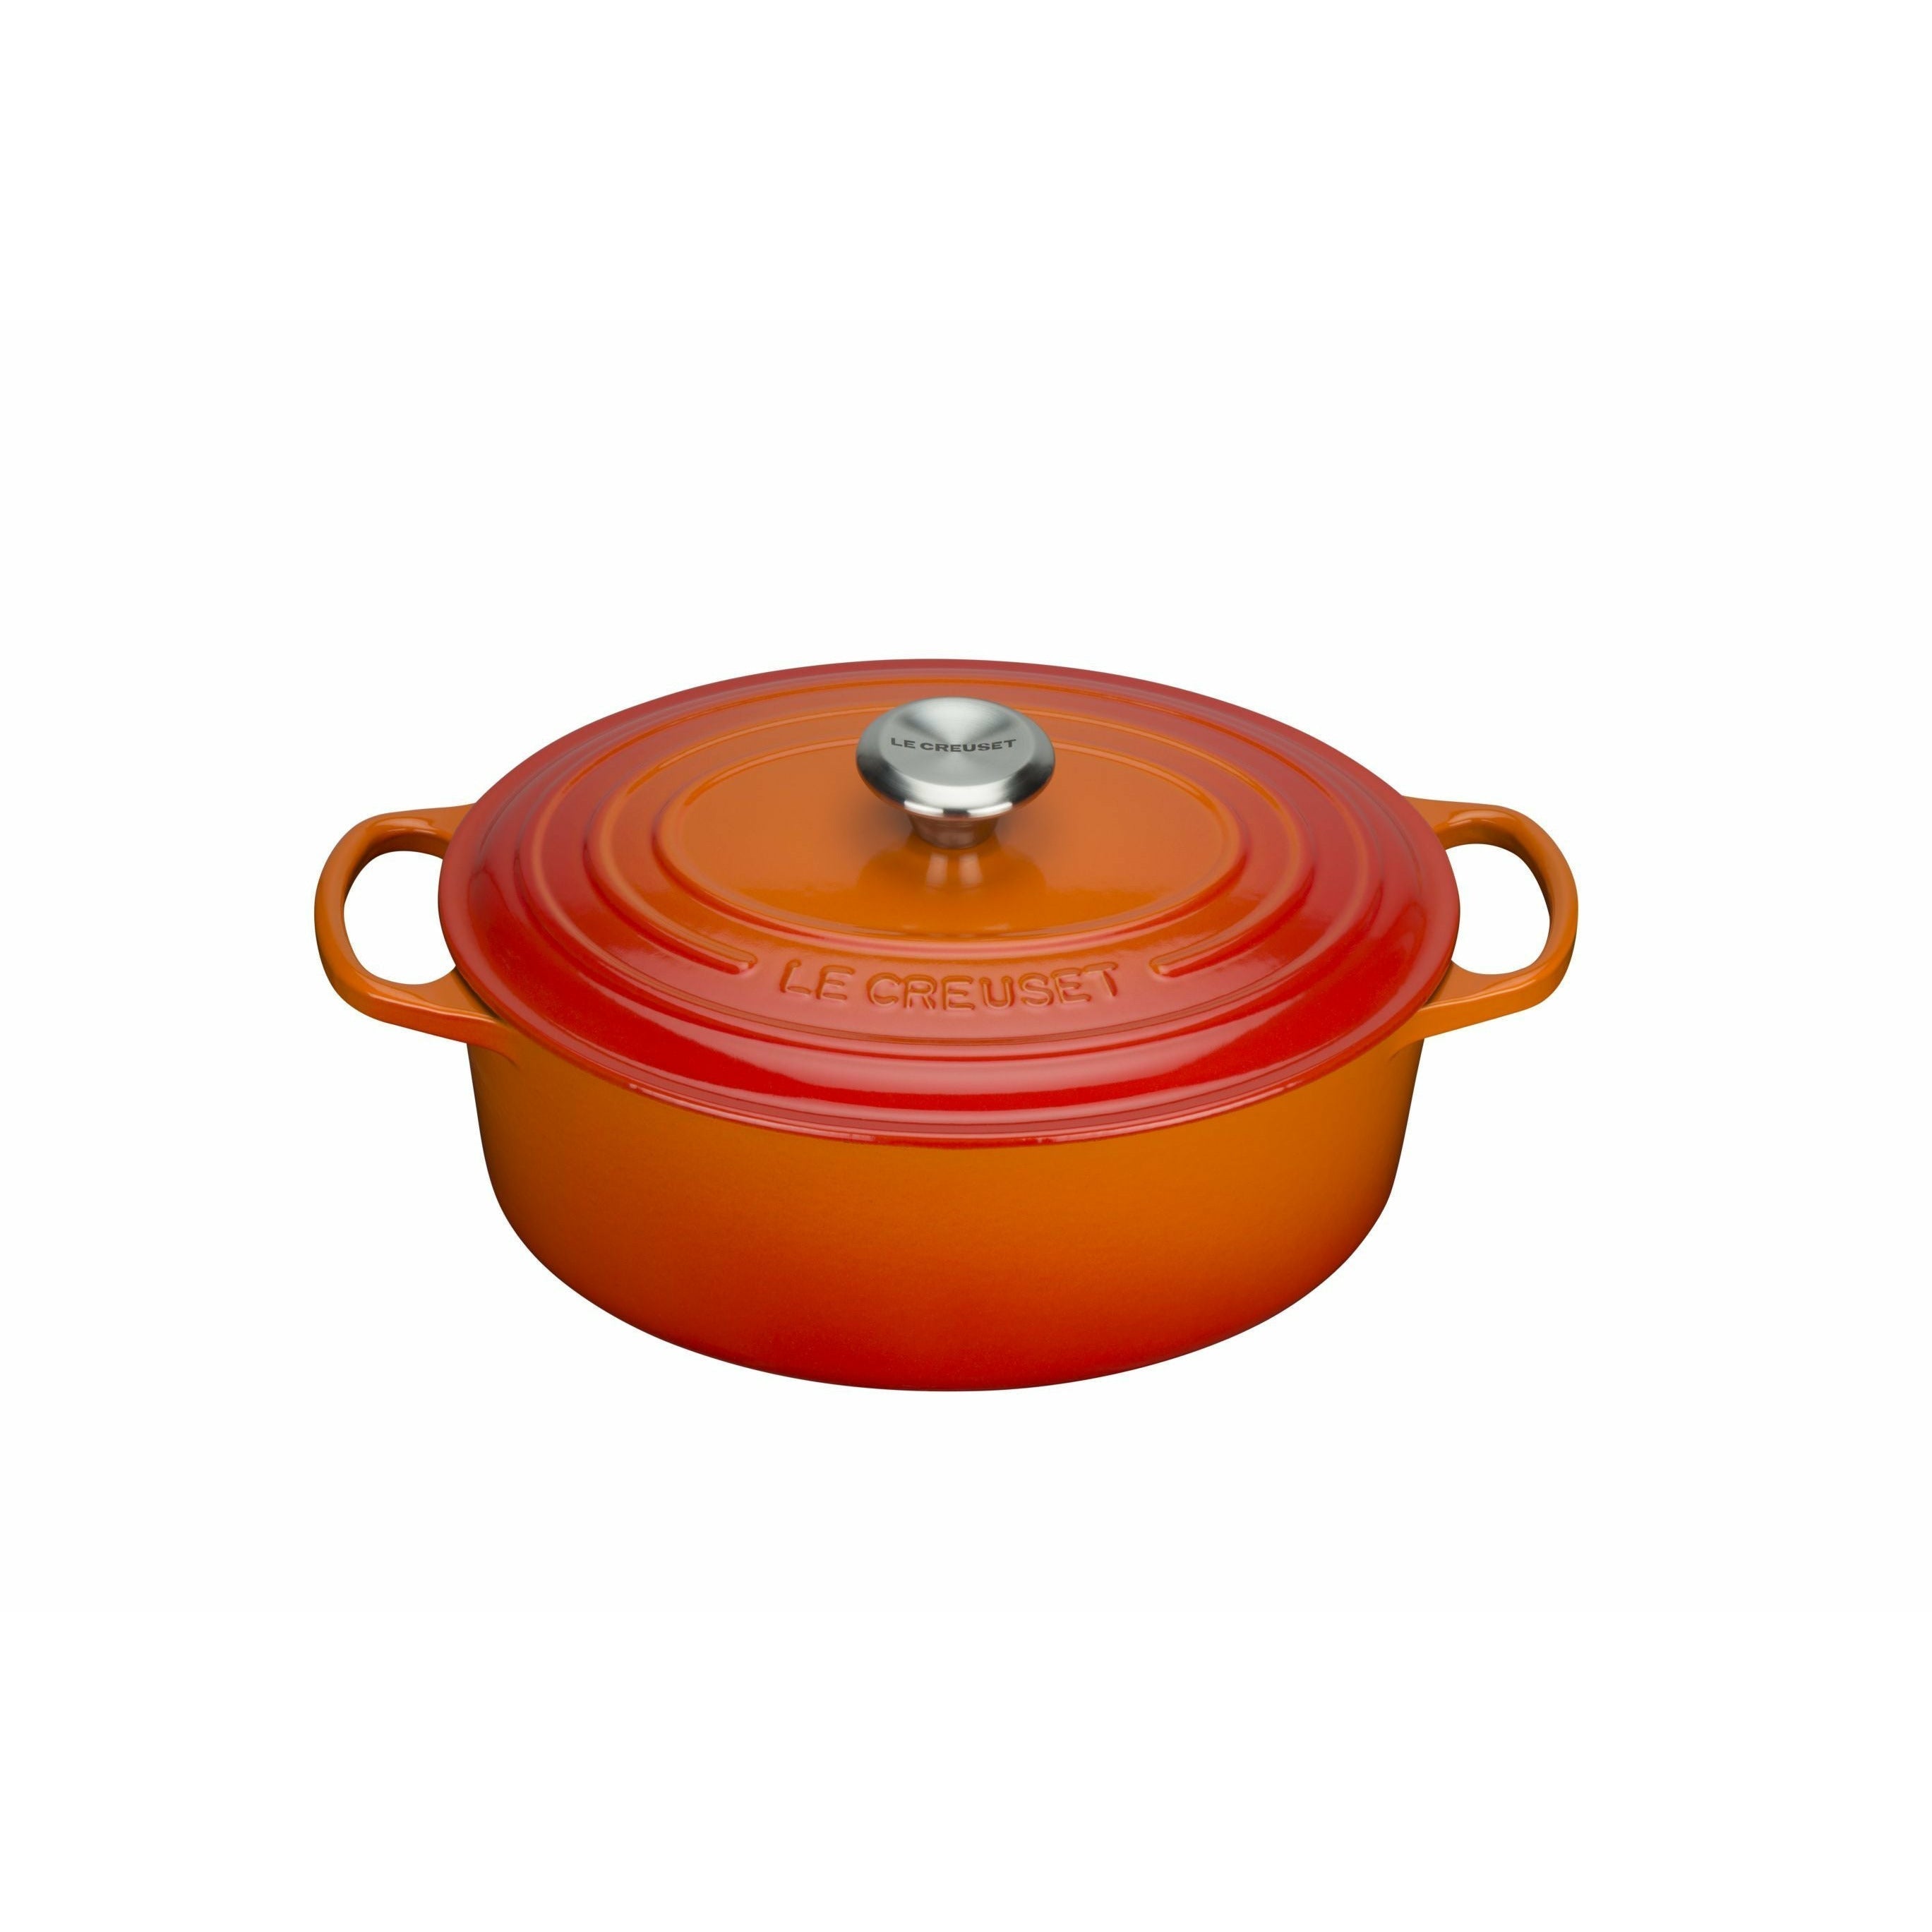 Le Creuset Signature Oval Roaster 29 Cm, Oven Red